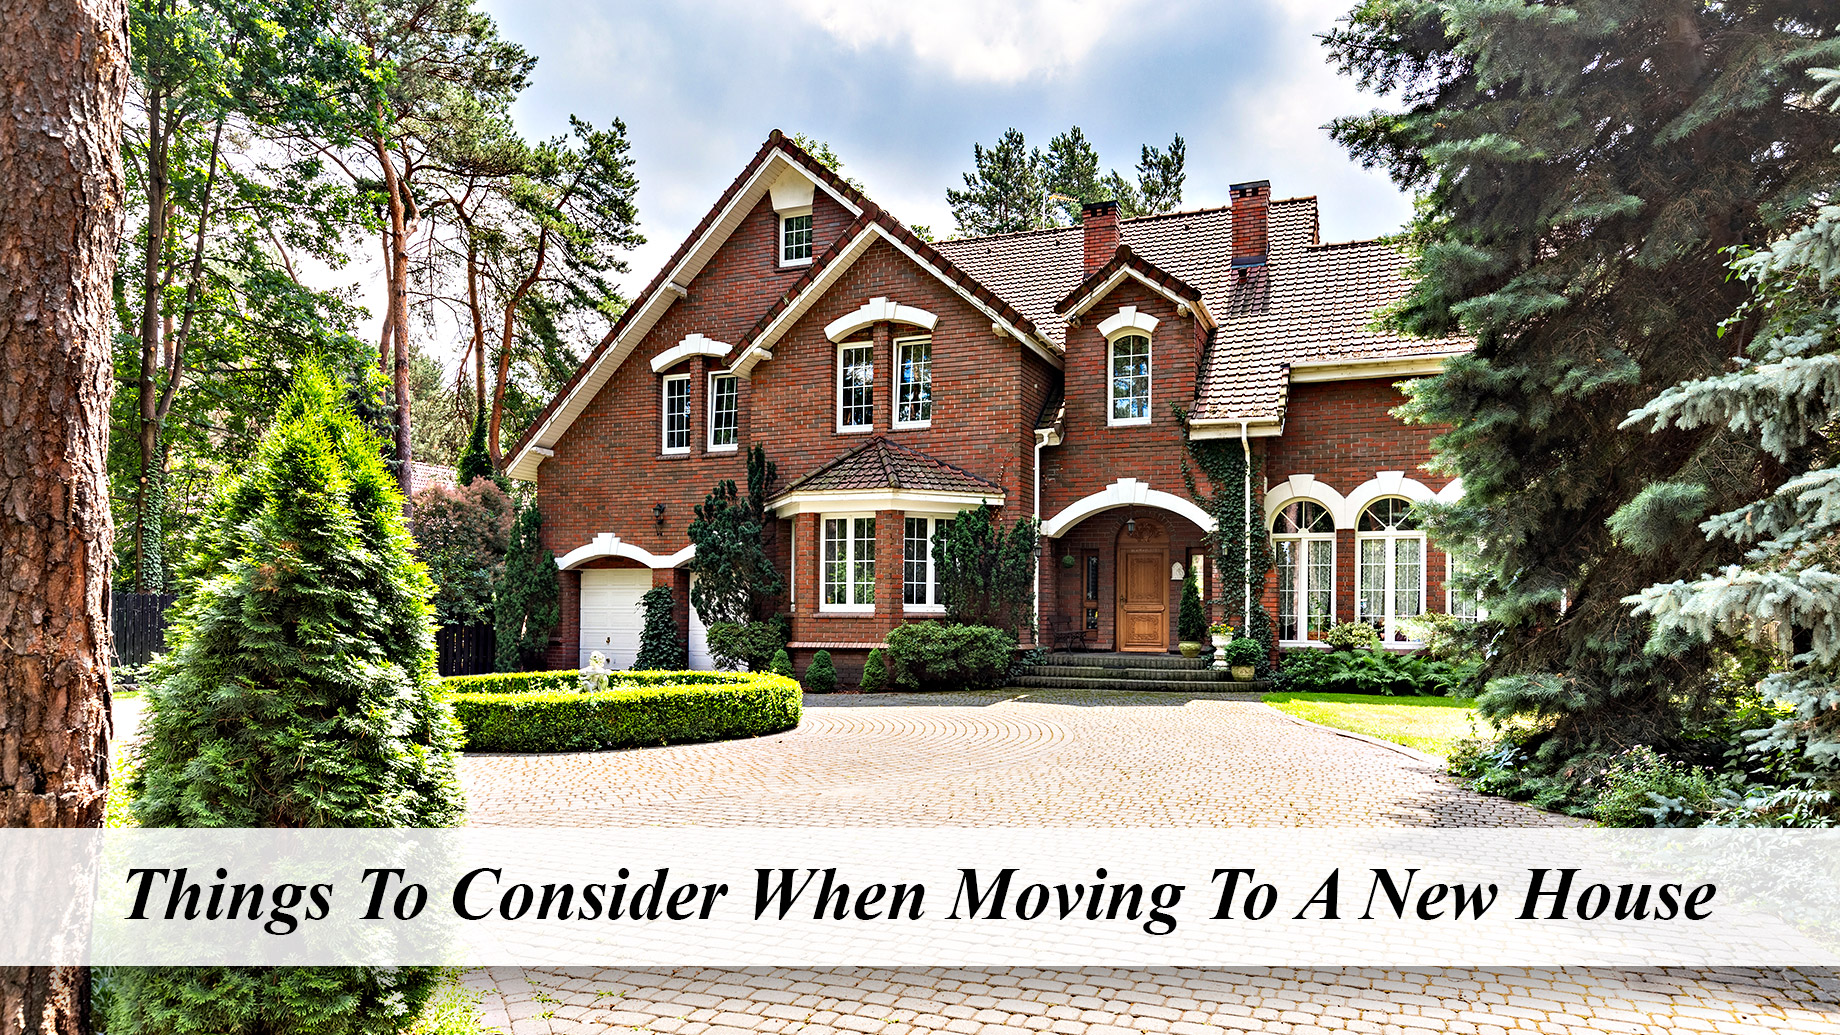 Things To Consider When Moving To A New House